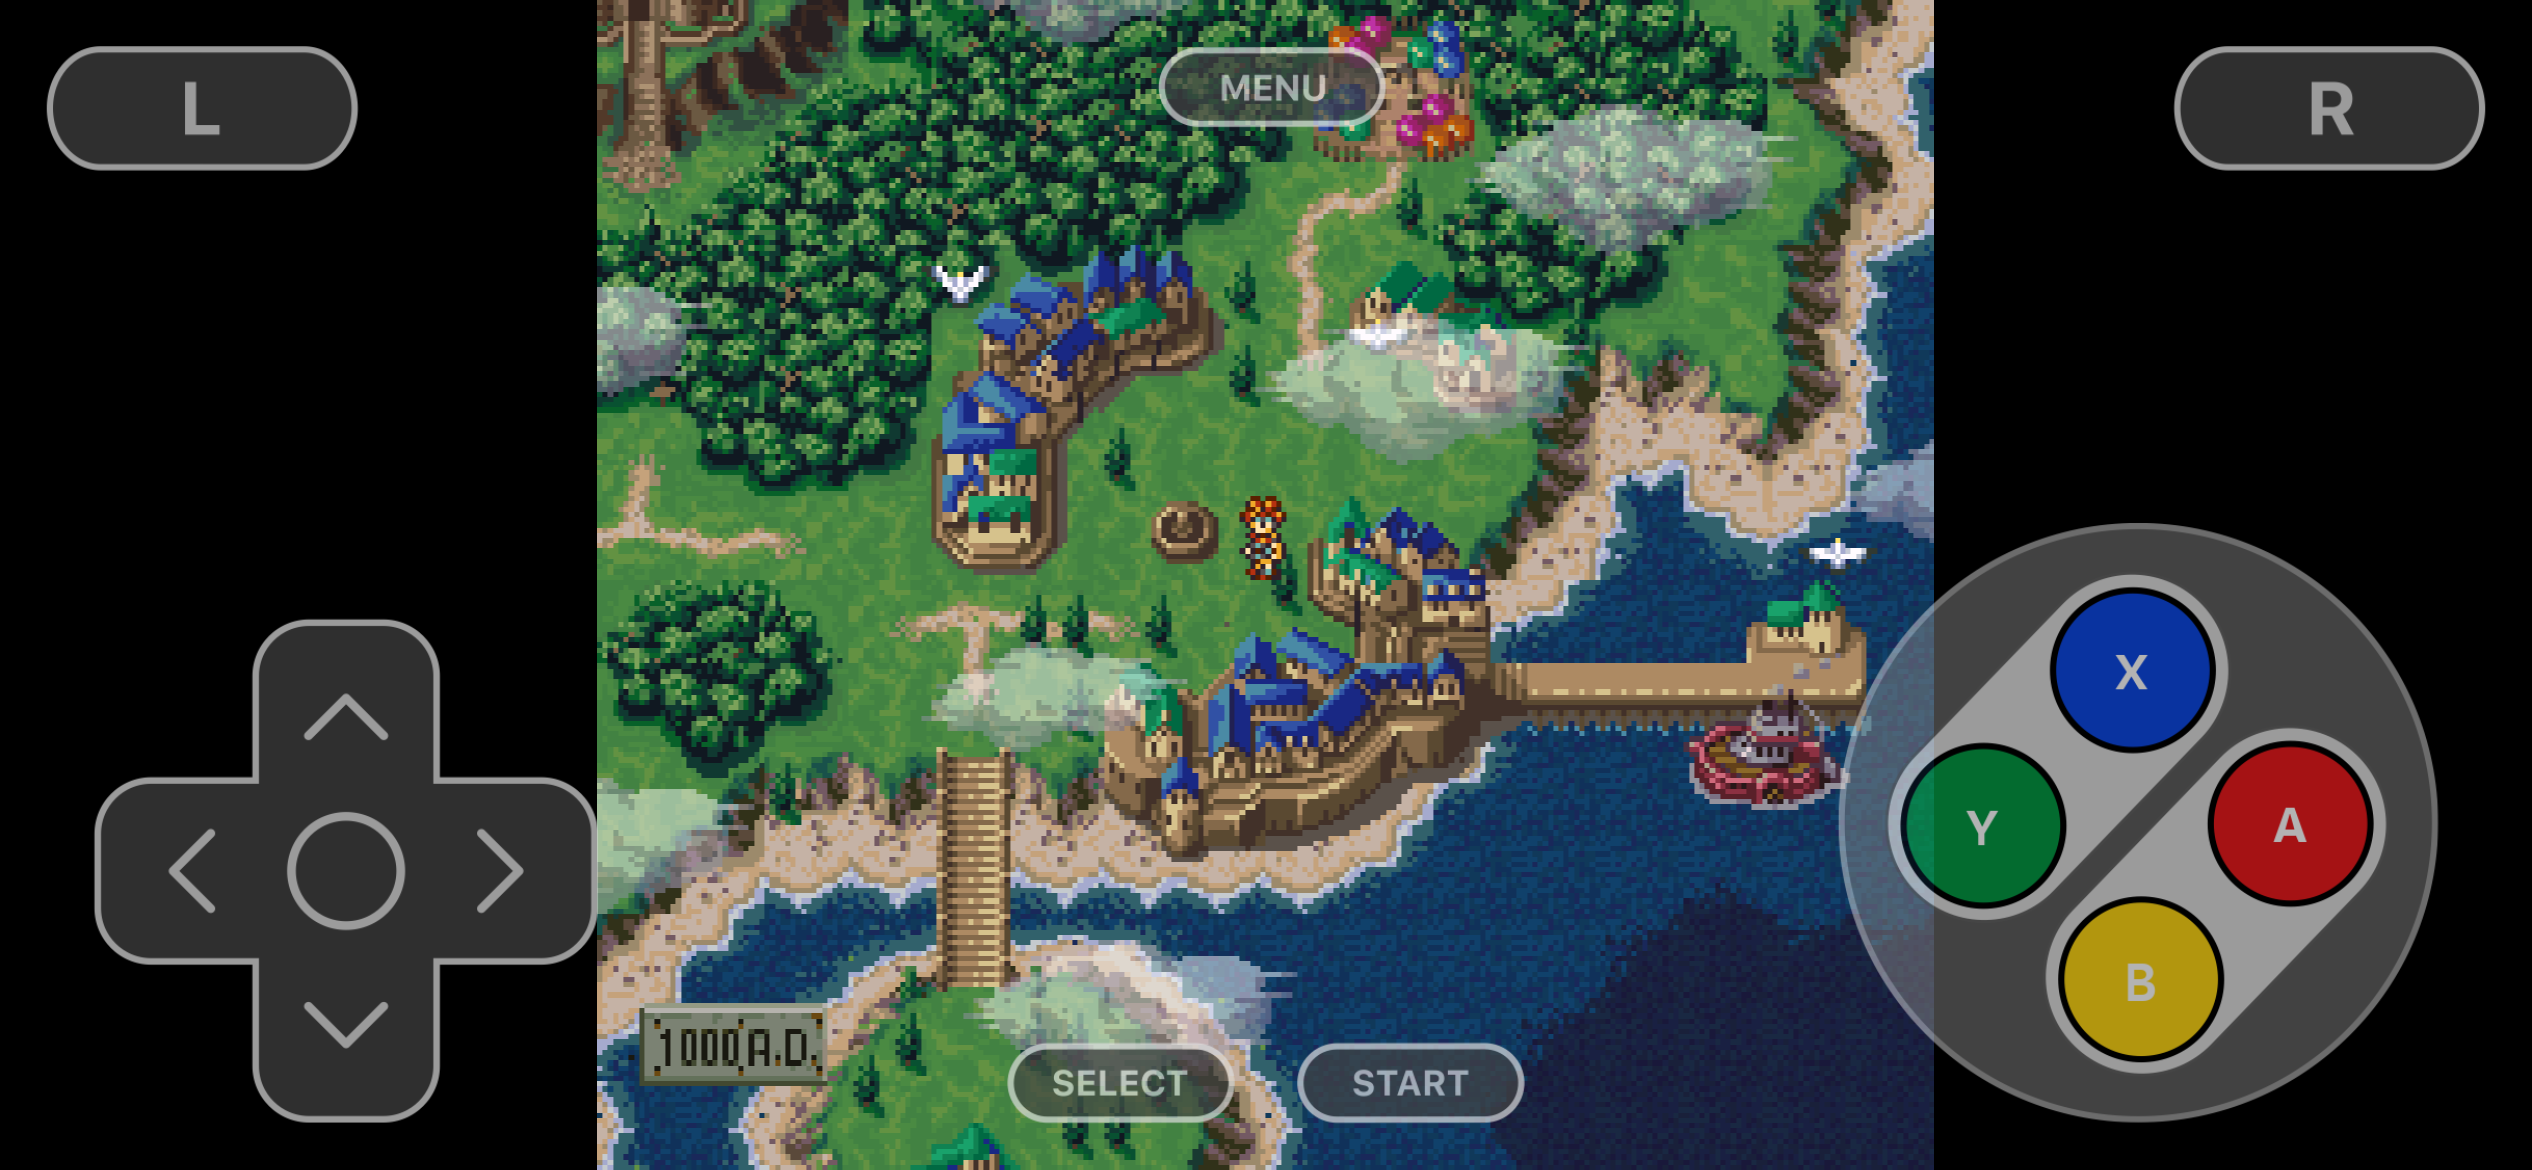 SNES classic RPG Chrono Trigger running on Delta for iPhone.